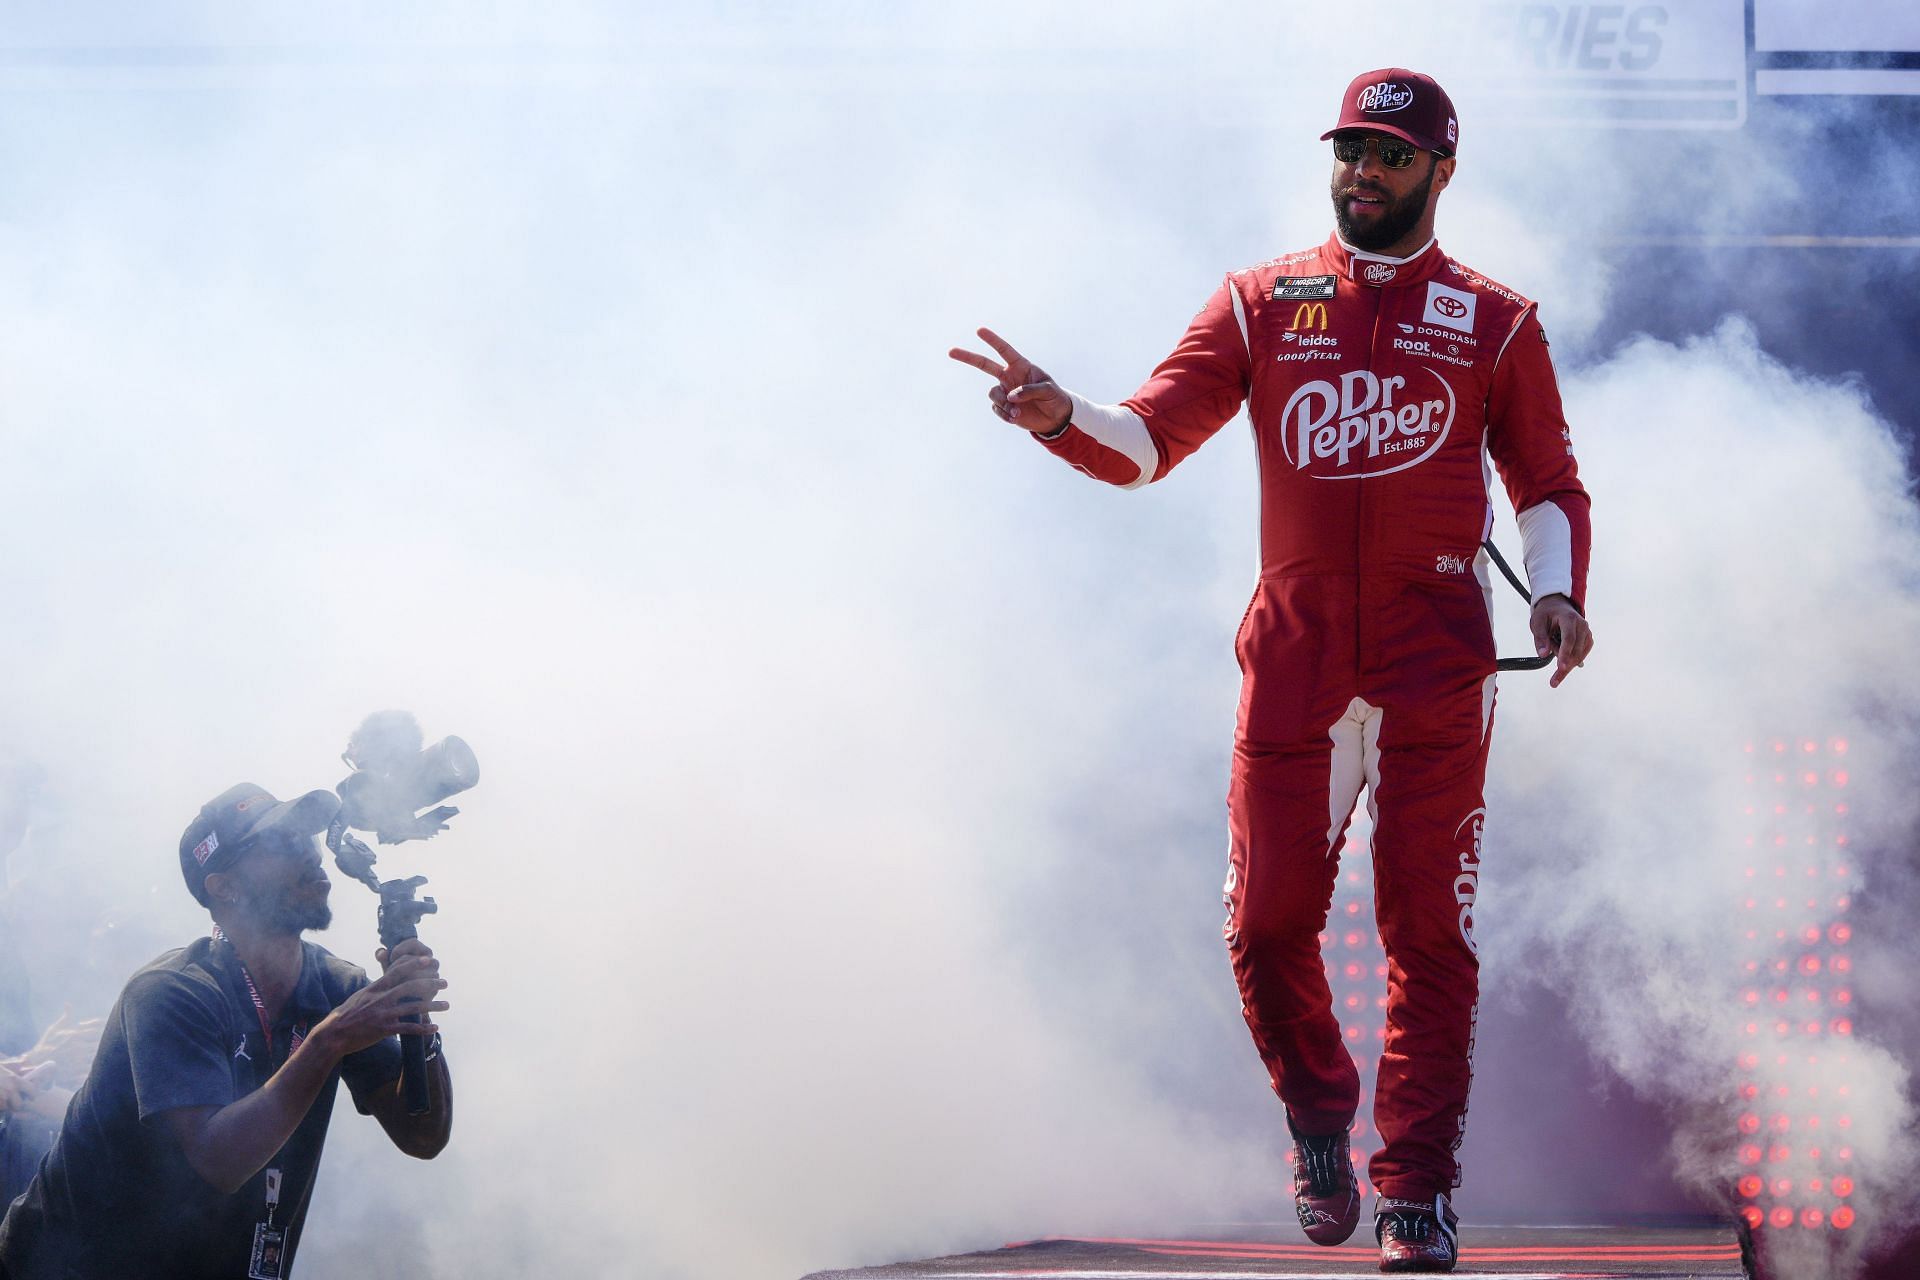 Bubba Wallace Jr. waves to fans onstage during driver intros prior to the NASCAR Cup Series Toyota Owners 400 at Richmond Raceway. (Photo by Jacob Kupferman/Getty Images)